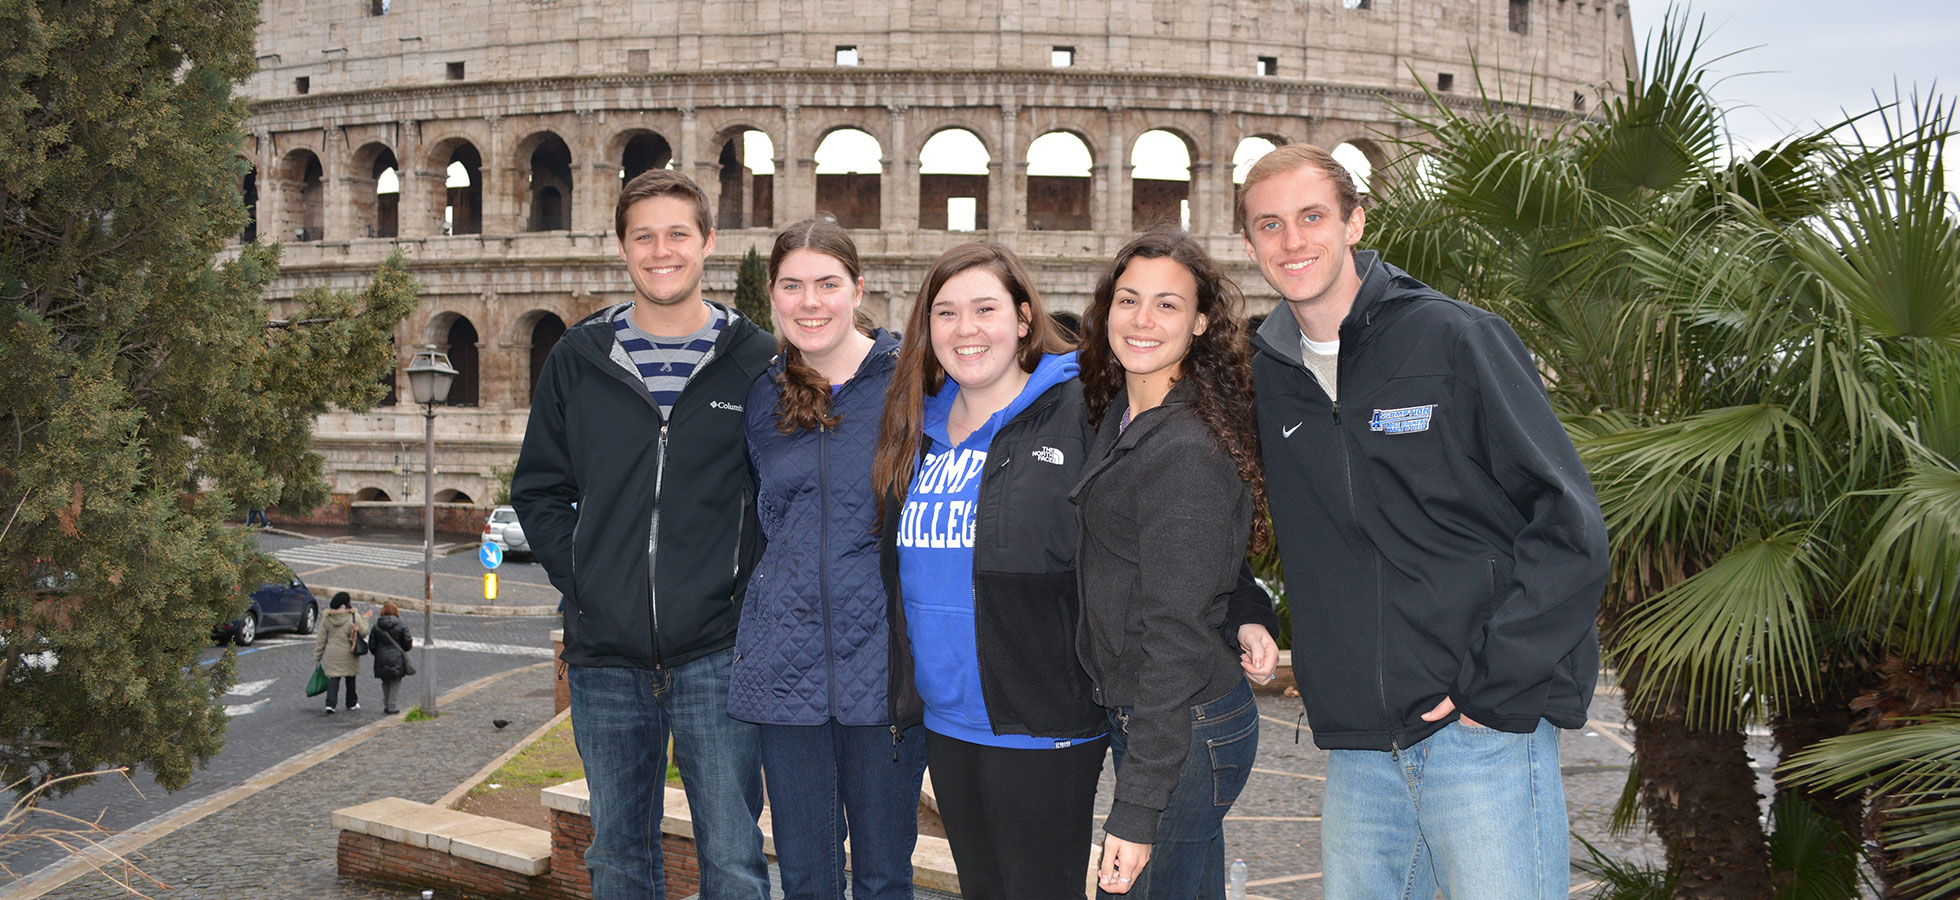 Assumption's Rome Campus Named One of Top 10 Study Abroad Programs in U.S.